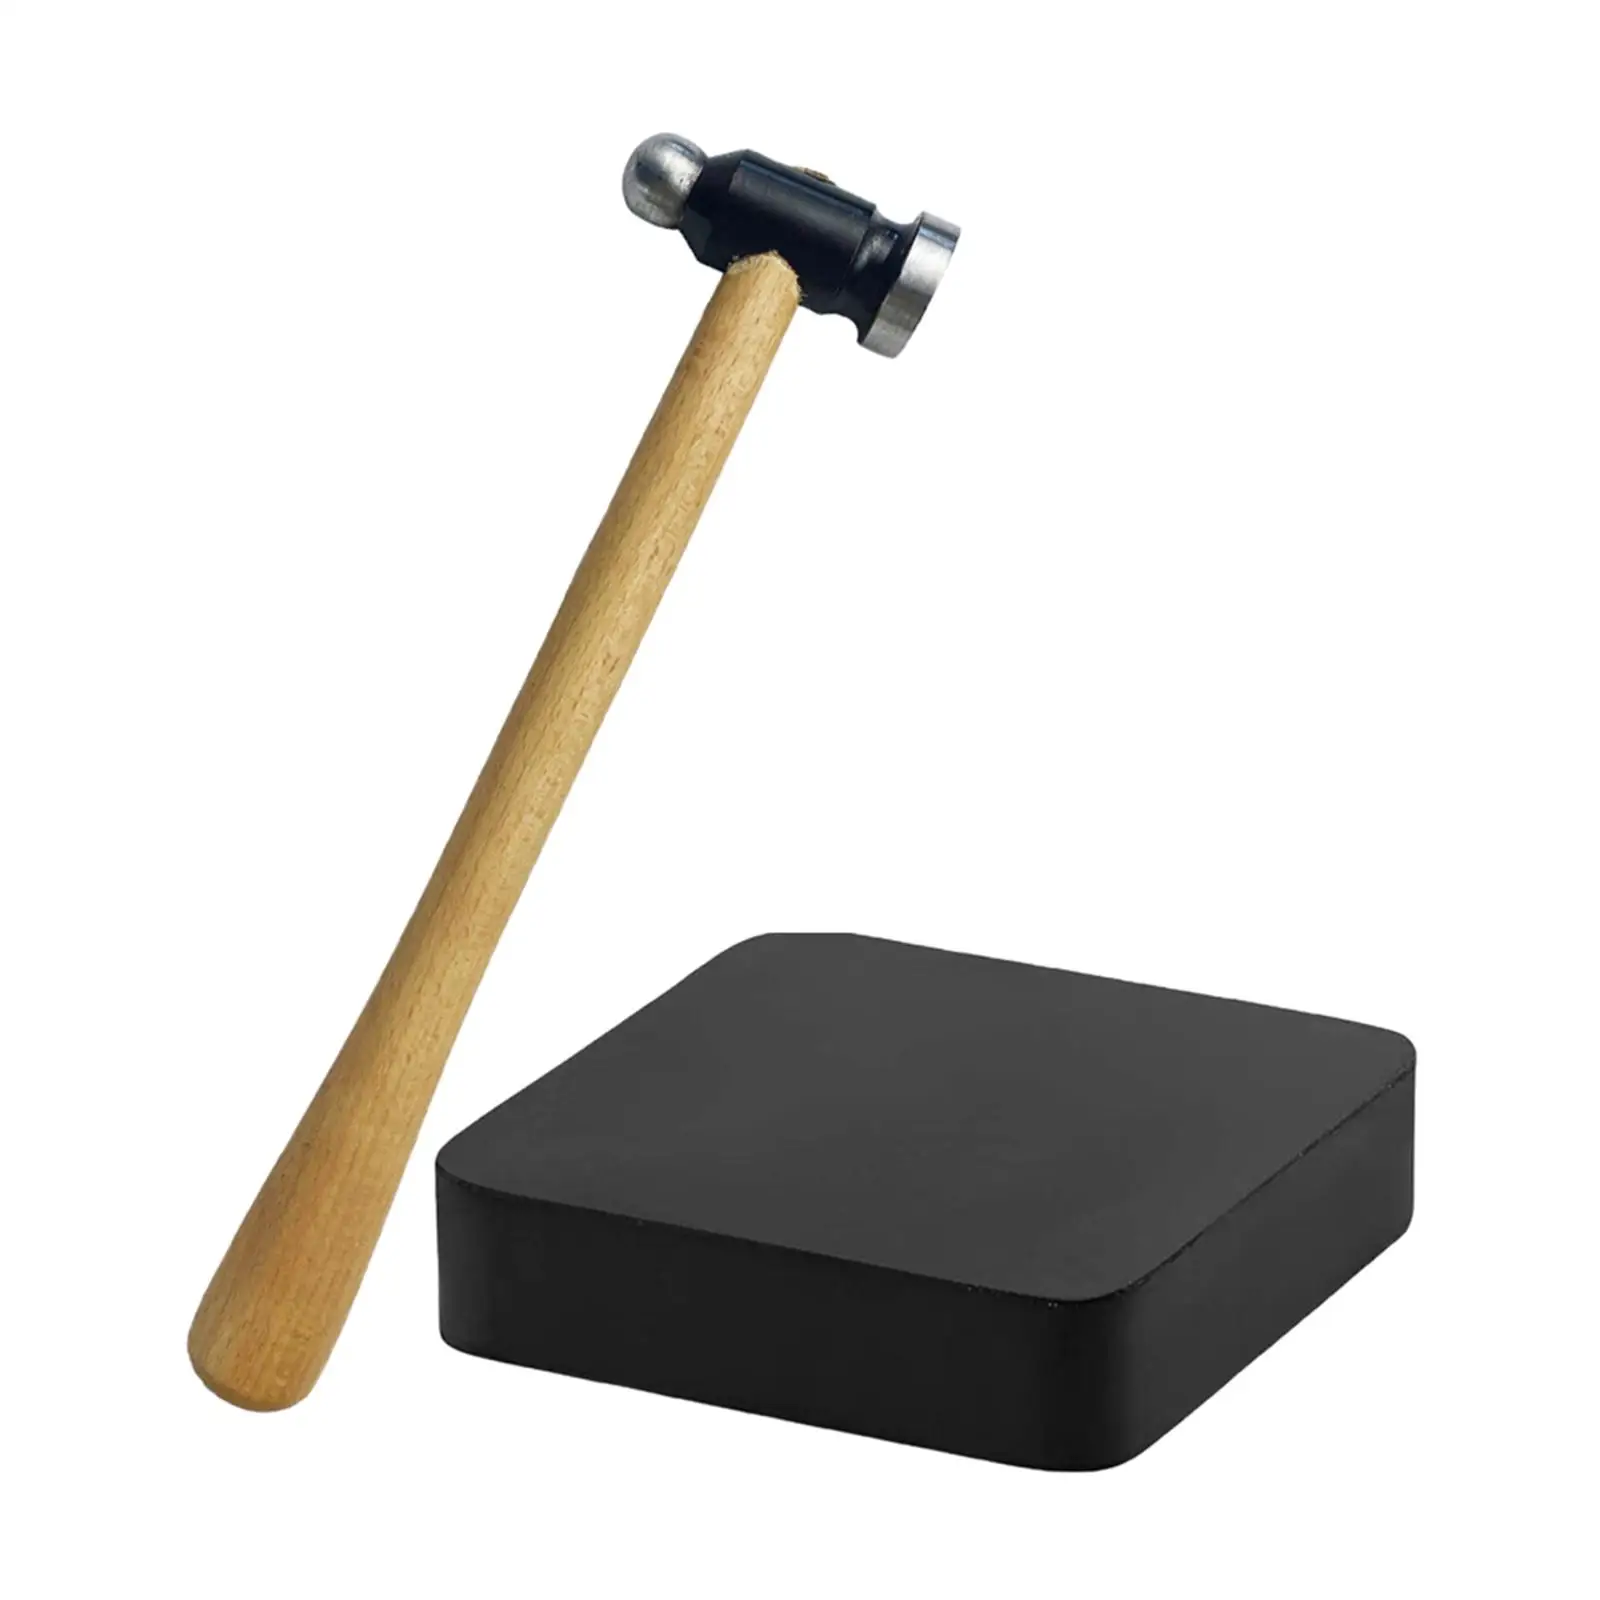 Steel Mallet with Rubber Bench Block for Hammering Metal Dapping Jewelry Making Crafts